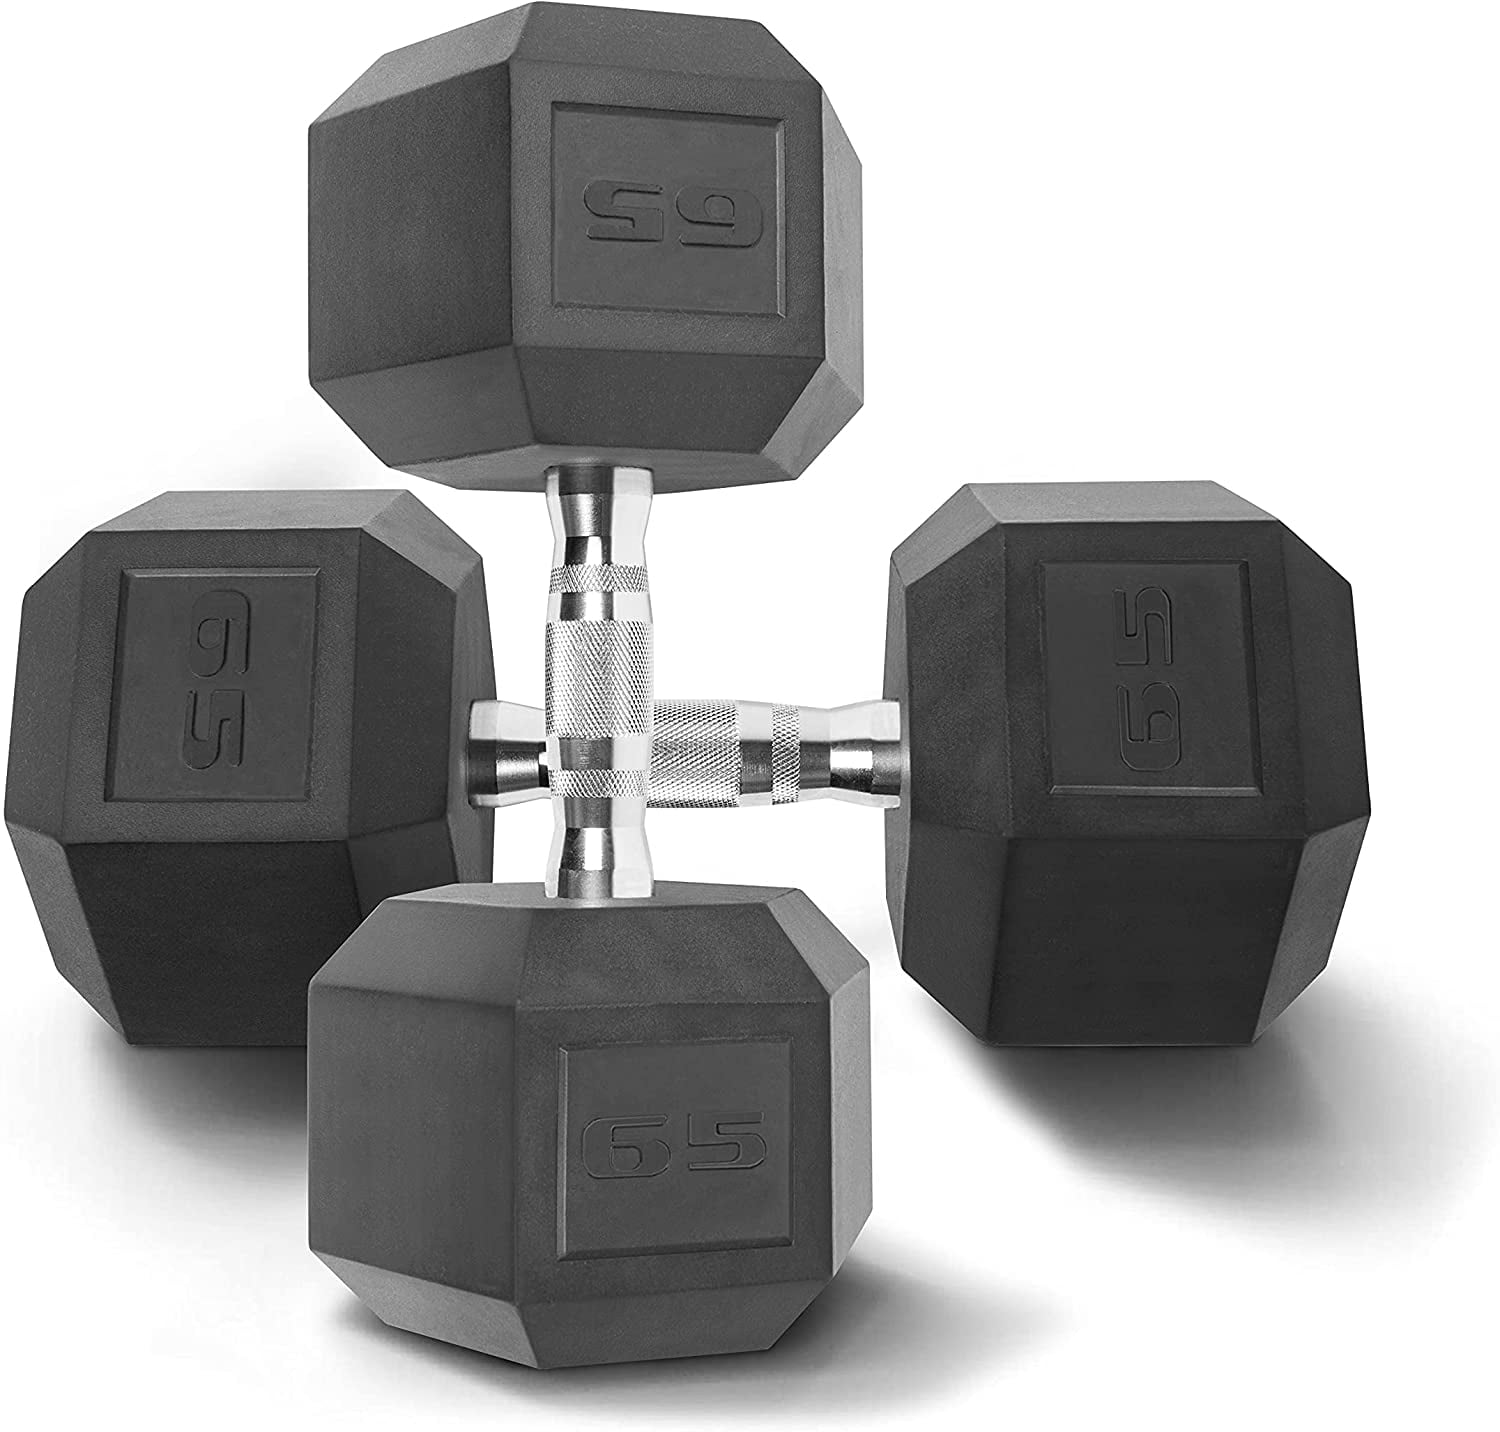 Rubber Hex Dumbbells Pair Hex Weights Dumbbells for Muscle Toning Home Gym Dumbbells WF Athletic Supply Rubber Coated Solid Steel Cast-Iron Pair Dumbbells Full Body Workout